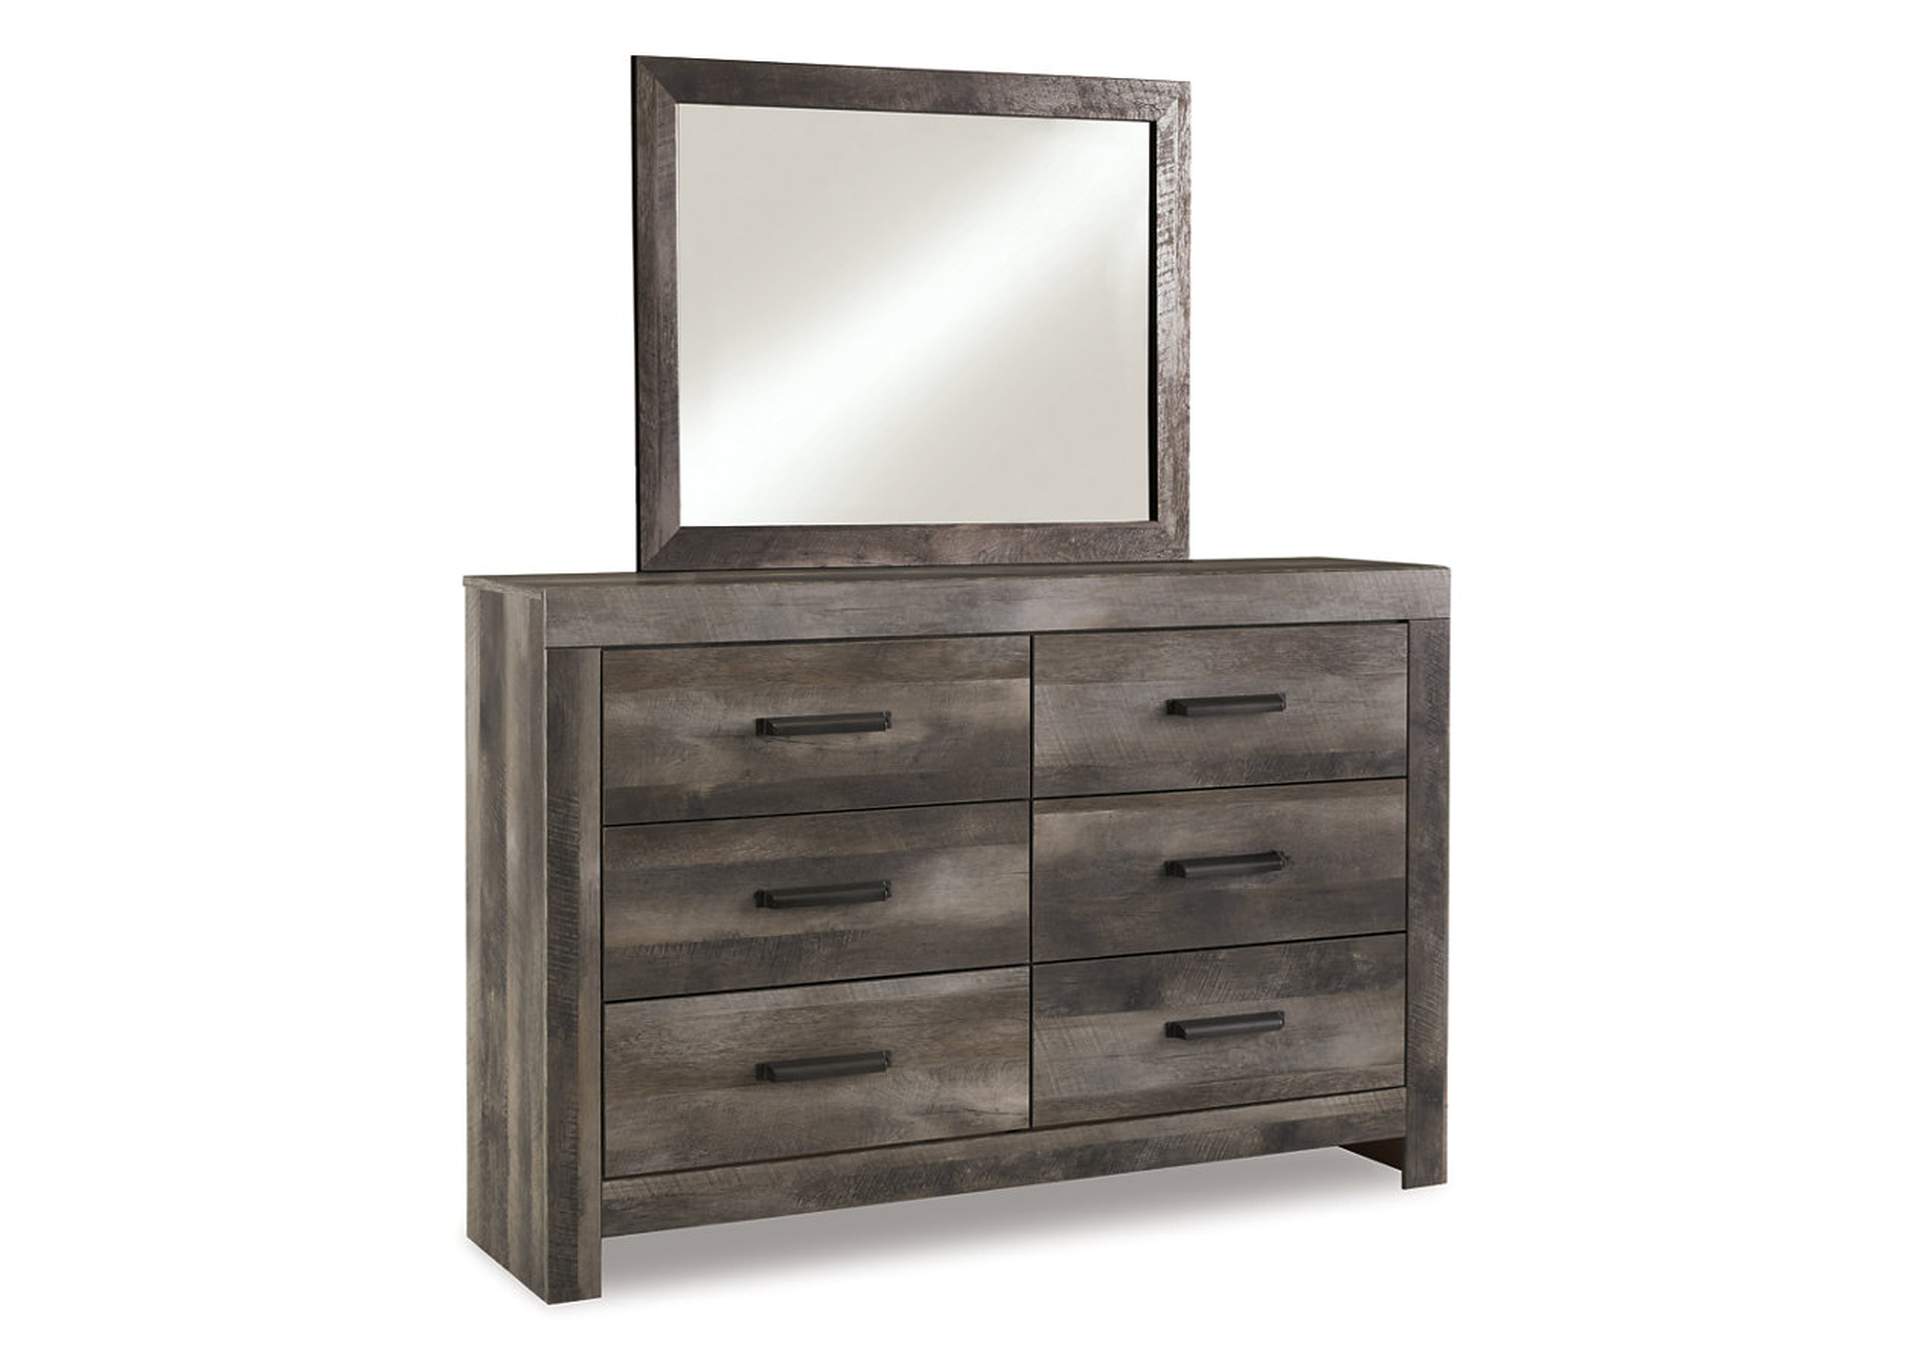 Wynnlow King Poster Bed with Mirrored Dresser,Signature Design By Ashley